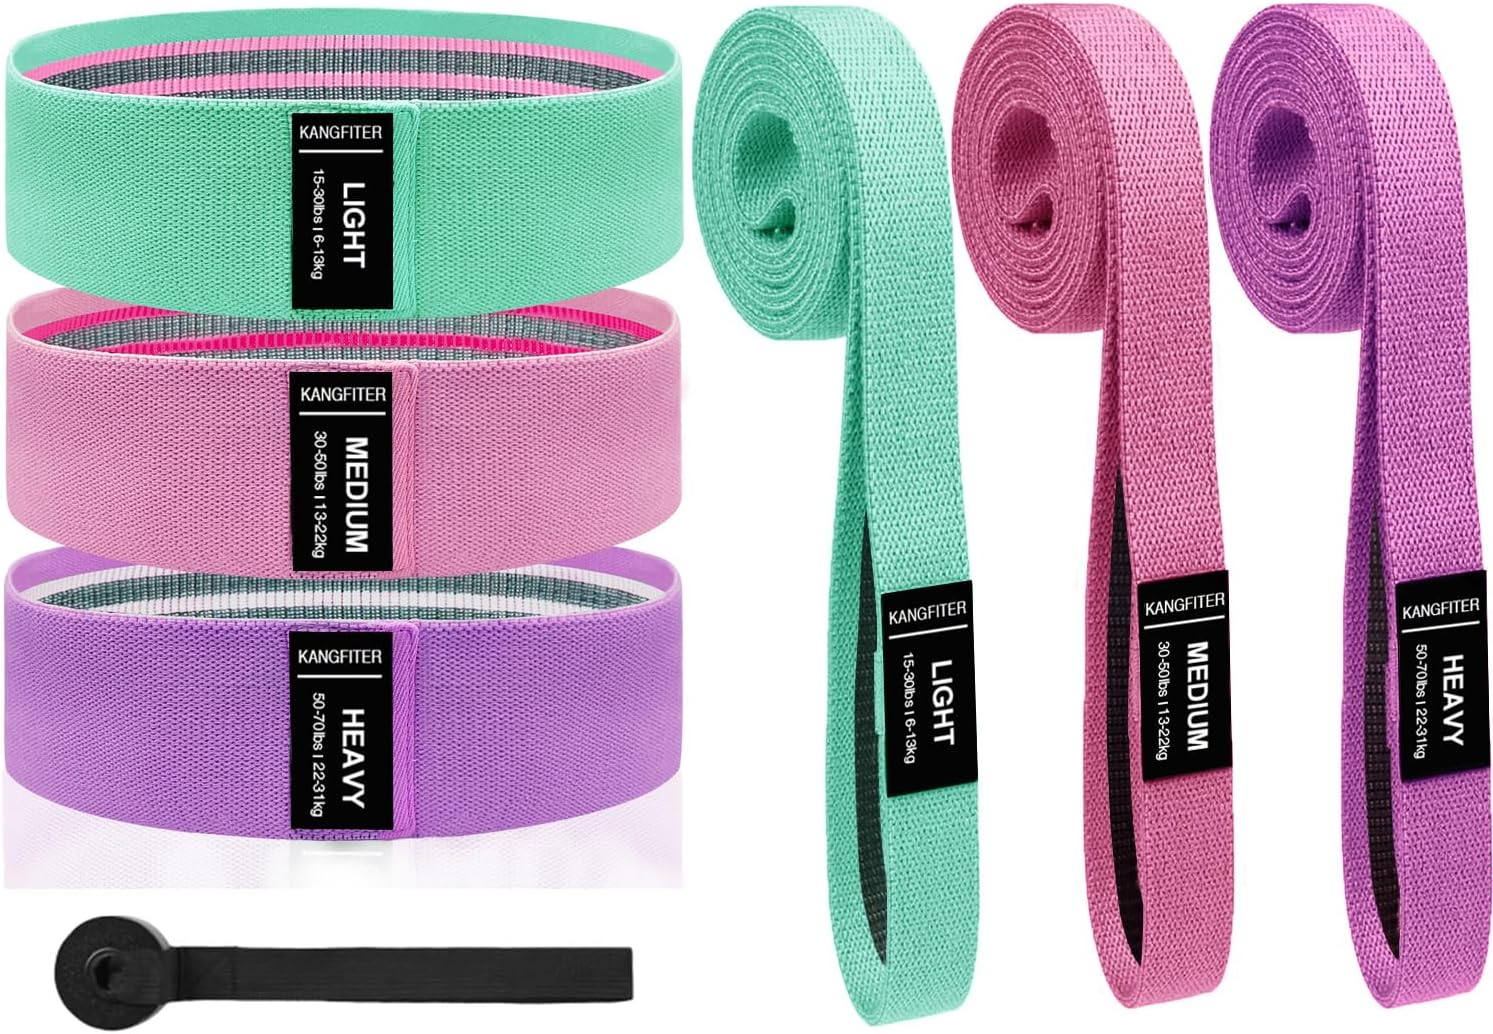 KANGFITER Fabric Resistance Bands for Working Out, 3 Level Non-Slip Booty Bands for Women and Men, Loop Exercise Bands Set for Leg and Glutes, Hip Elastic Bands for Home and Gym Fitness, Yoga, Pilates